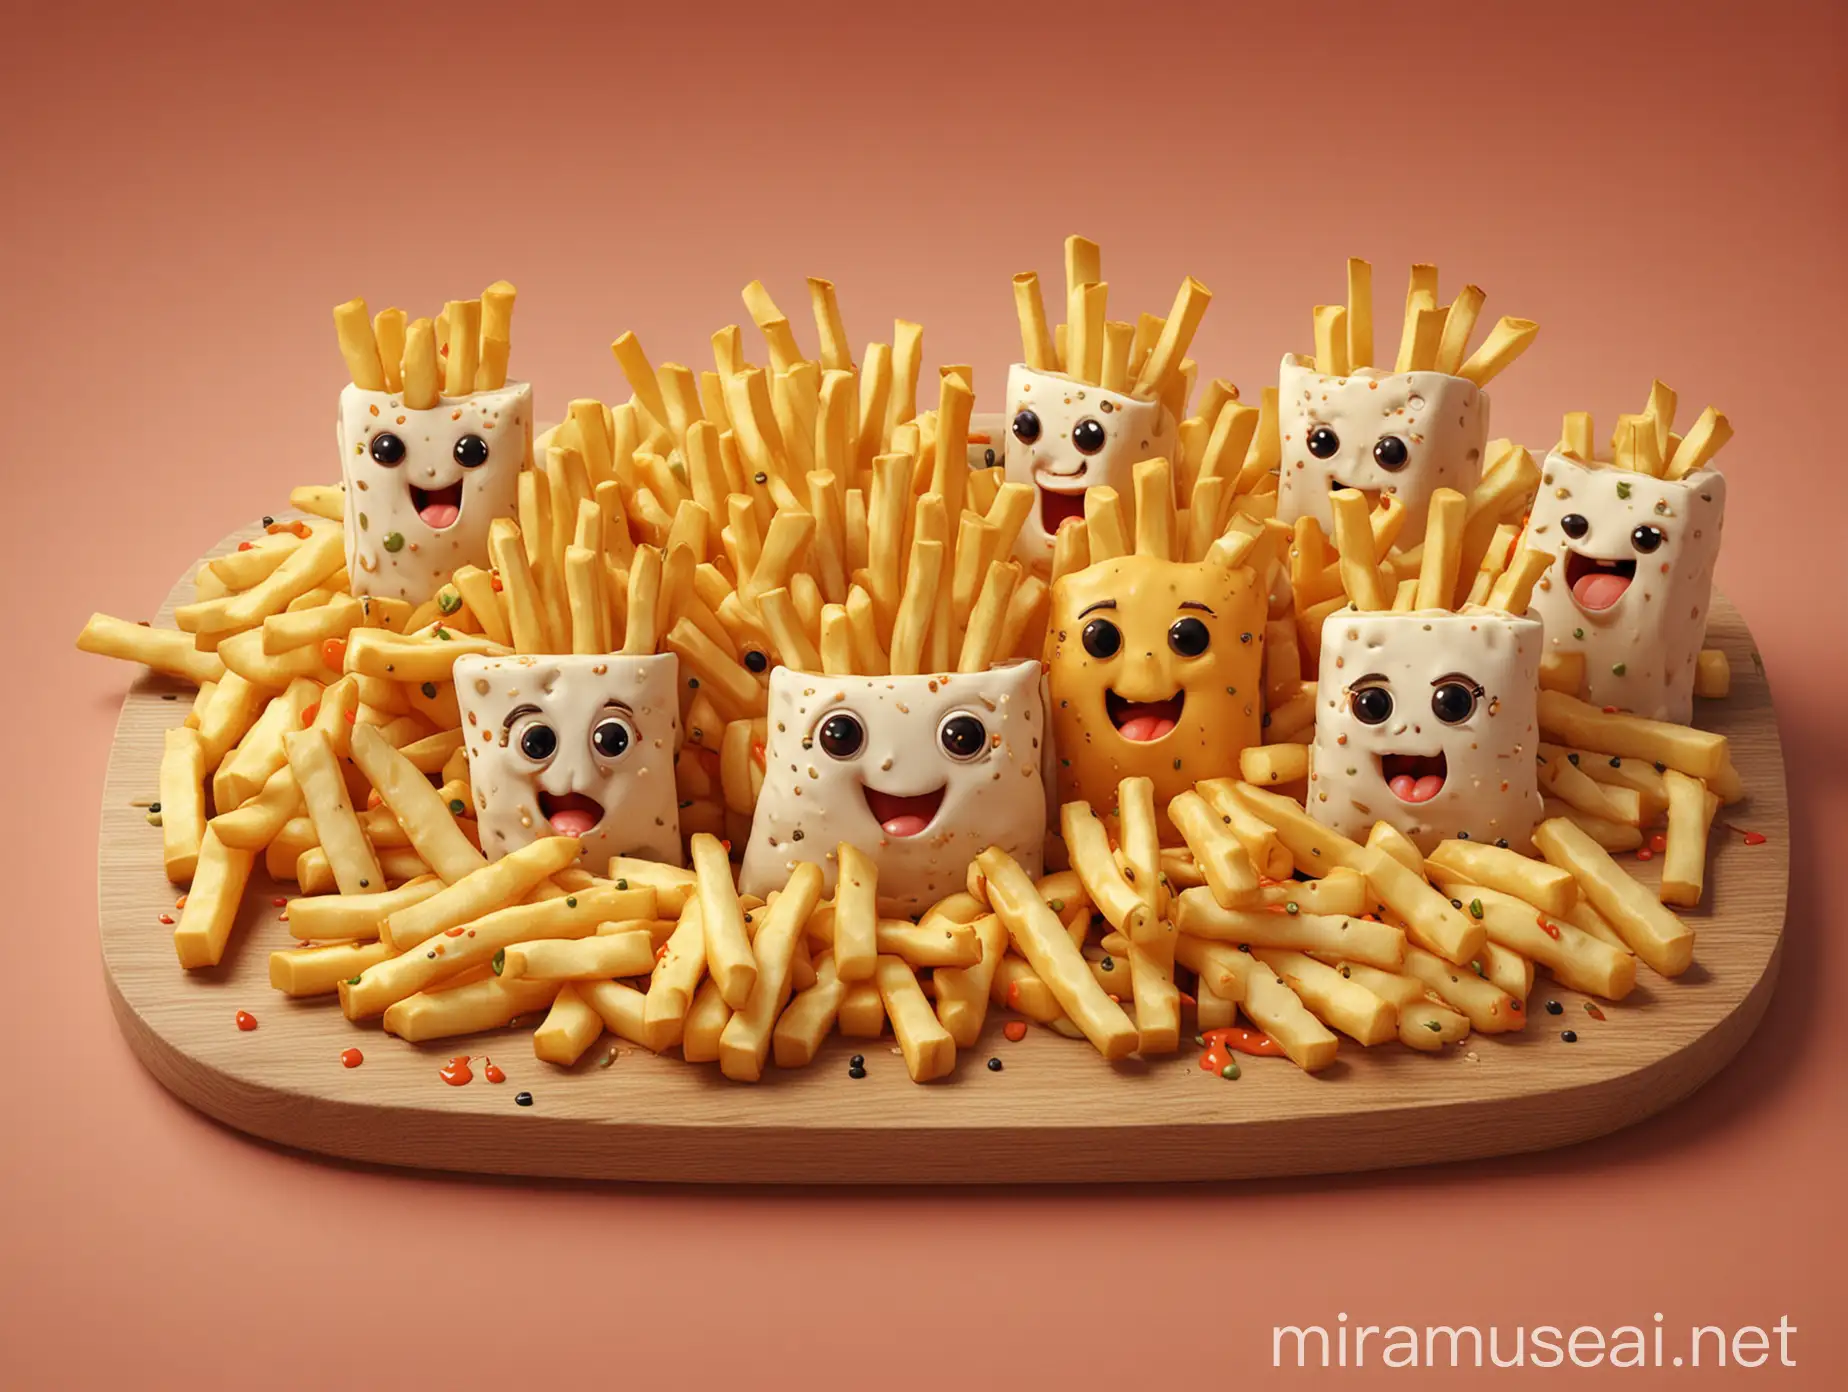  there are happy French fries, cheese sticks with faces and eyes, cute 3 d render, cute! c4d, cute digital art, pop japonisme 3 d ultra detailed, adorable digital painting, cute detailed digital art, sushi, anime food, kawaii hq render, trend on behance 3 d art, trend on behance 3d art